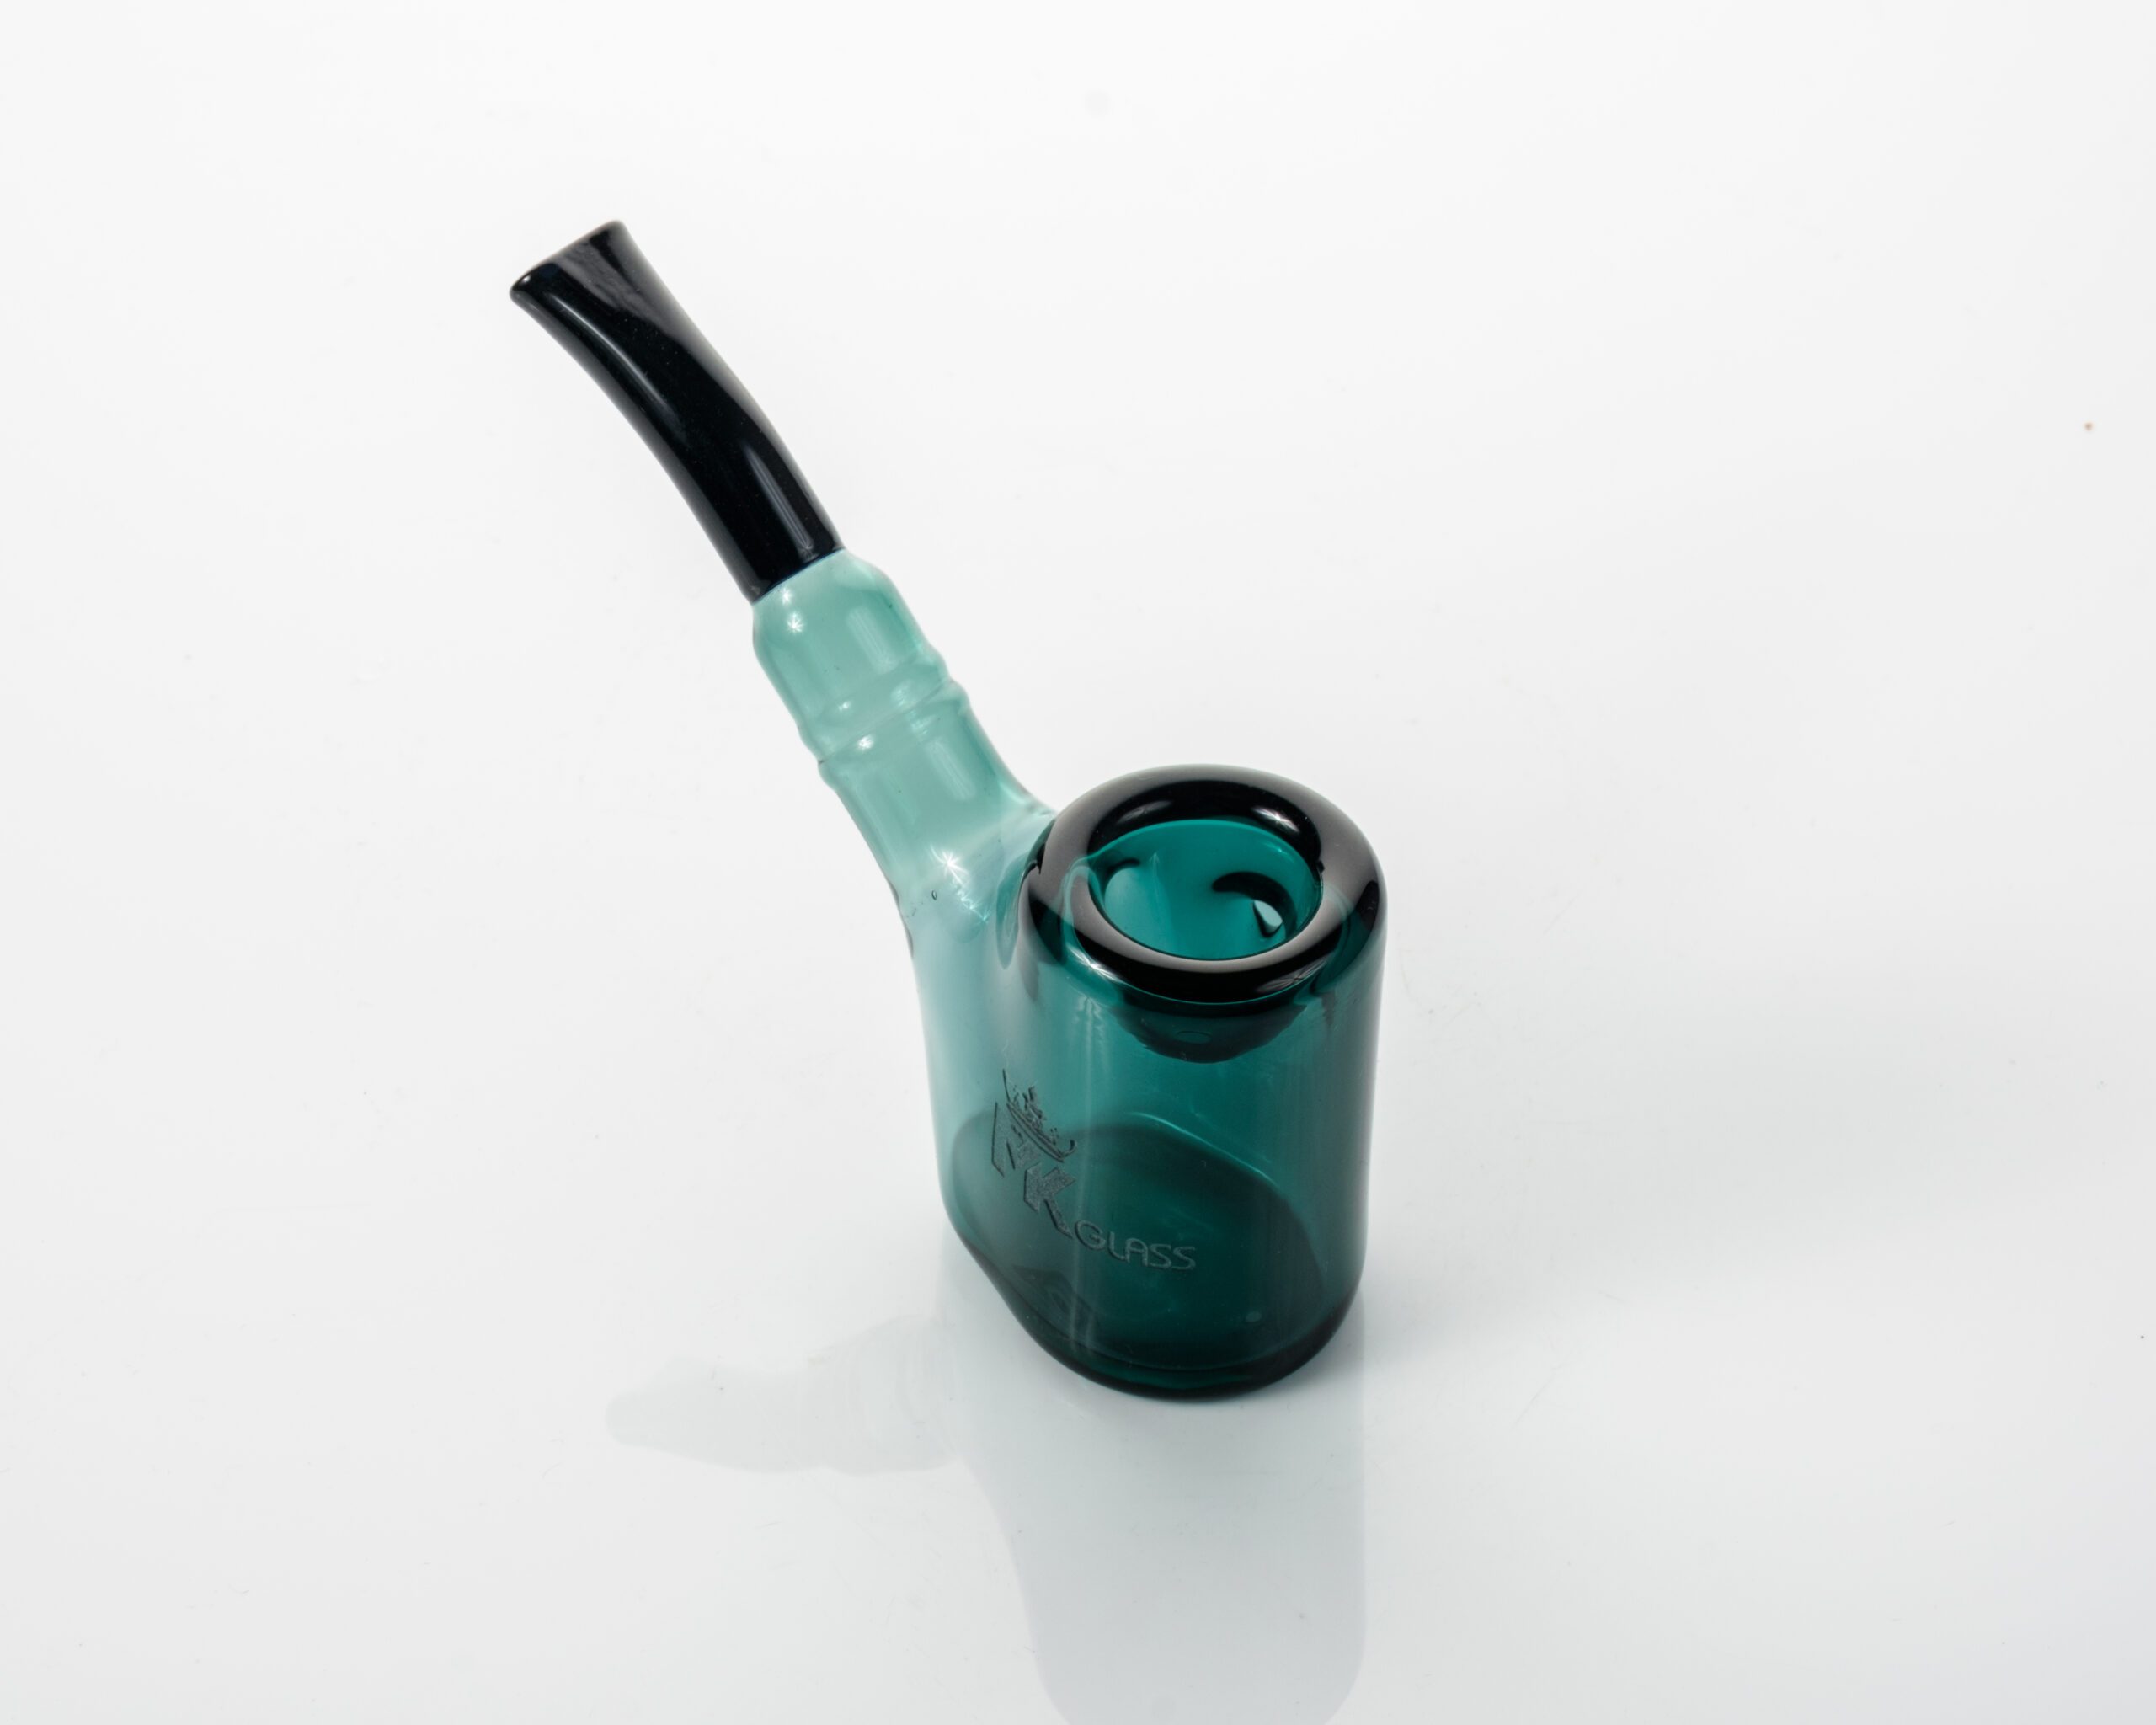 Changing colors Sherlock glass hand pipes 4.5 – Mile High Glass Pipes